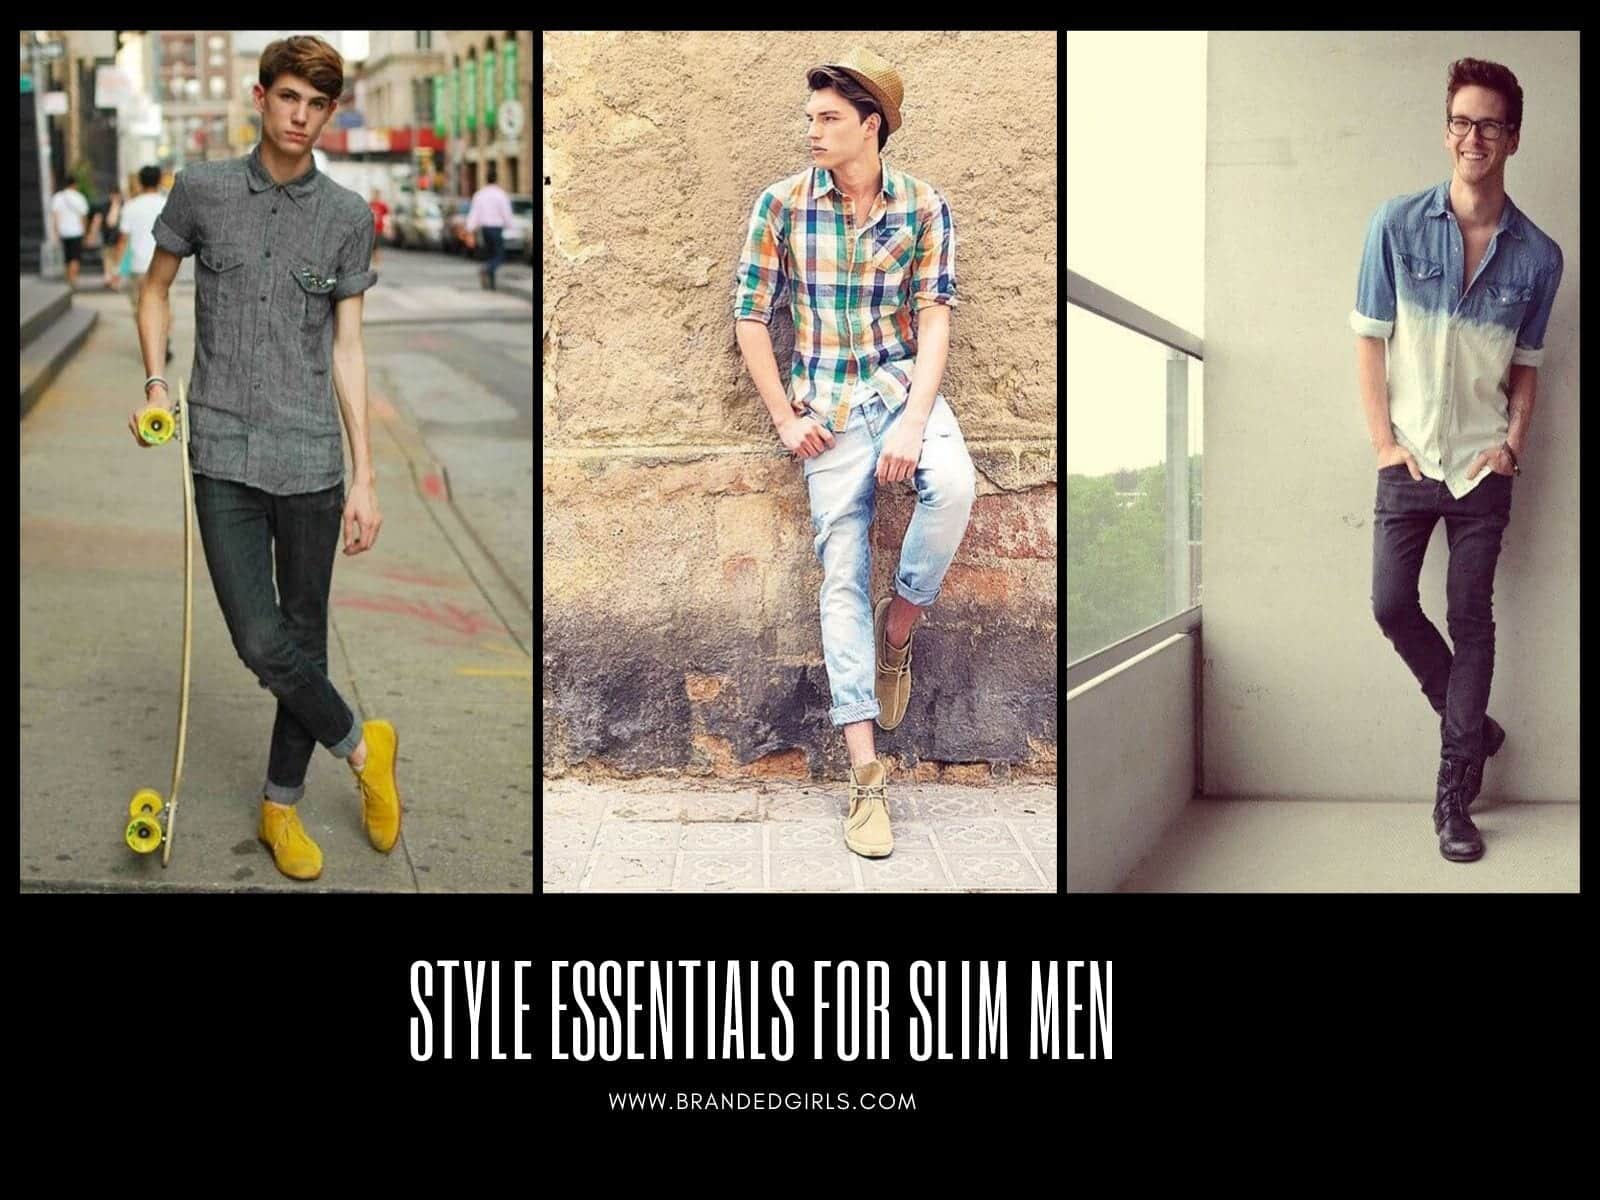 Style Essentials for Skinny Men